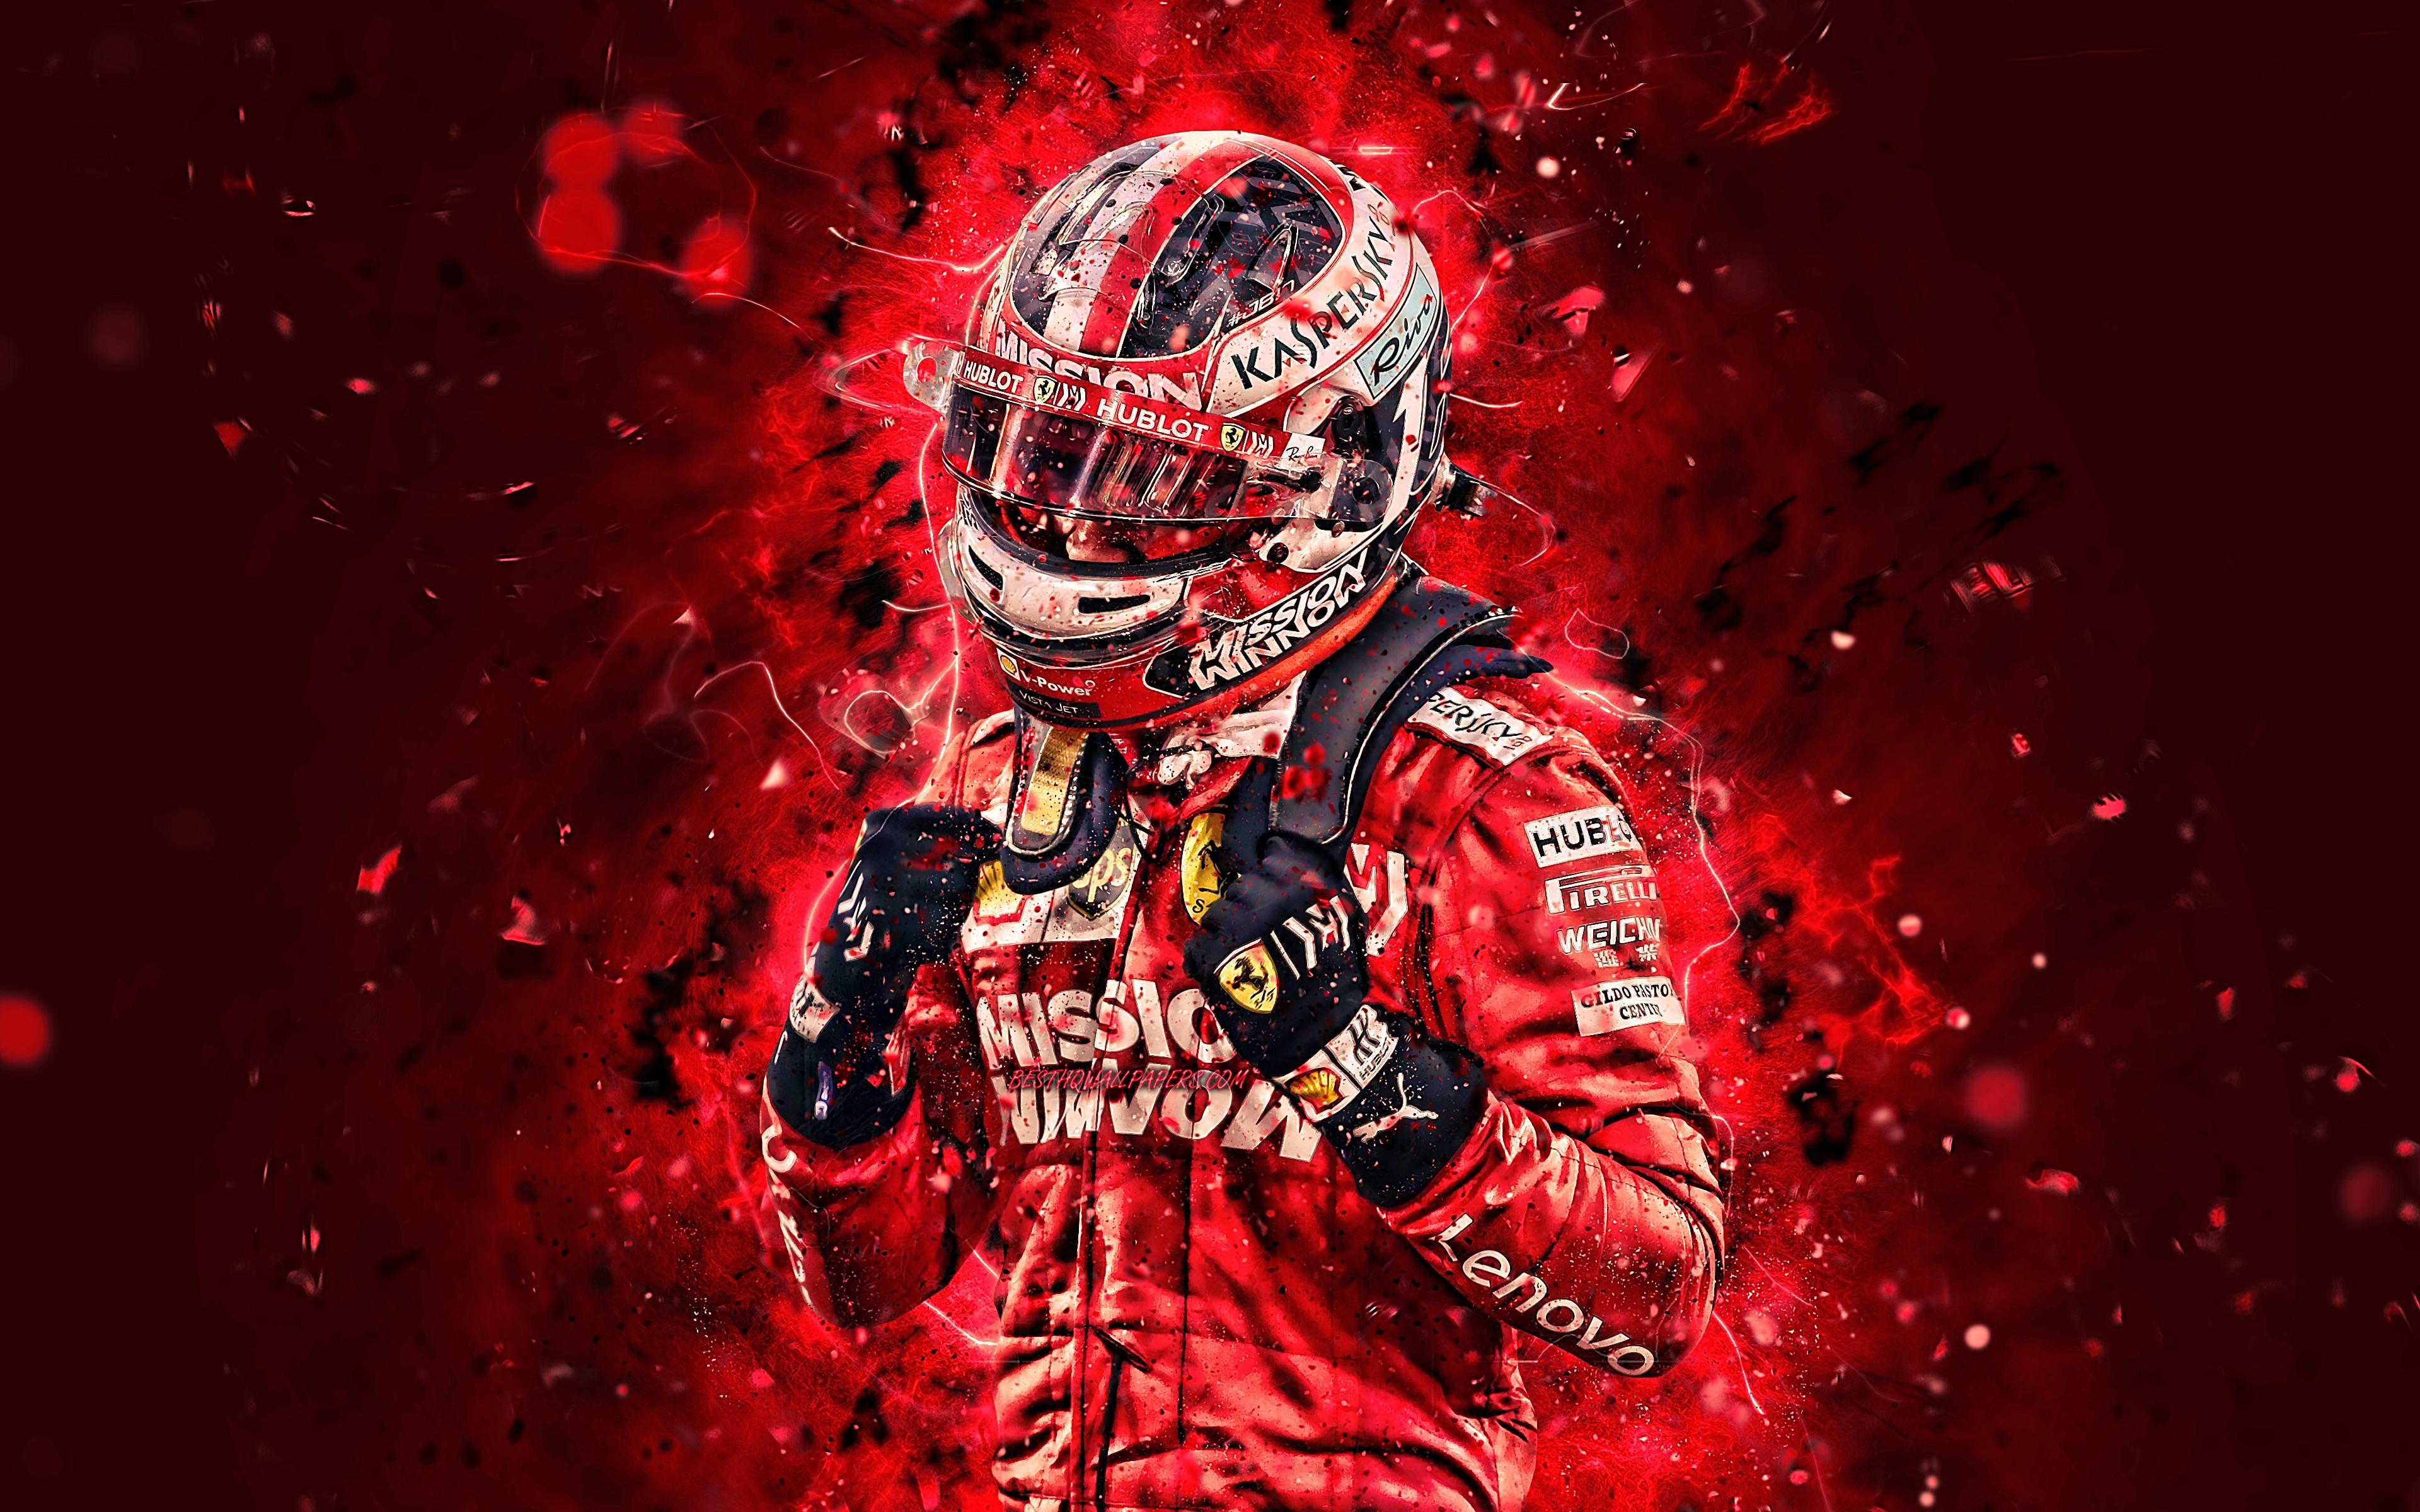 Download wallpaper Charles Leclerc, 4k, Scuderia Ferrari, monegasque racing drivers, neon lights, Formula Leclerc Ferrari, F1 F HDR, Ferrari for desktop with resolution 3840x2400. High Quality HD picture wallpaper